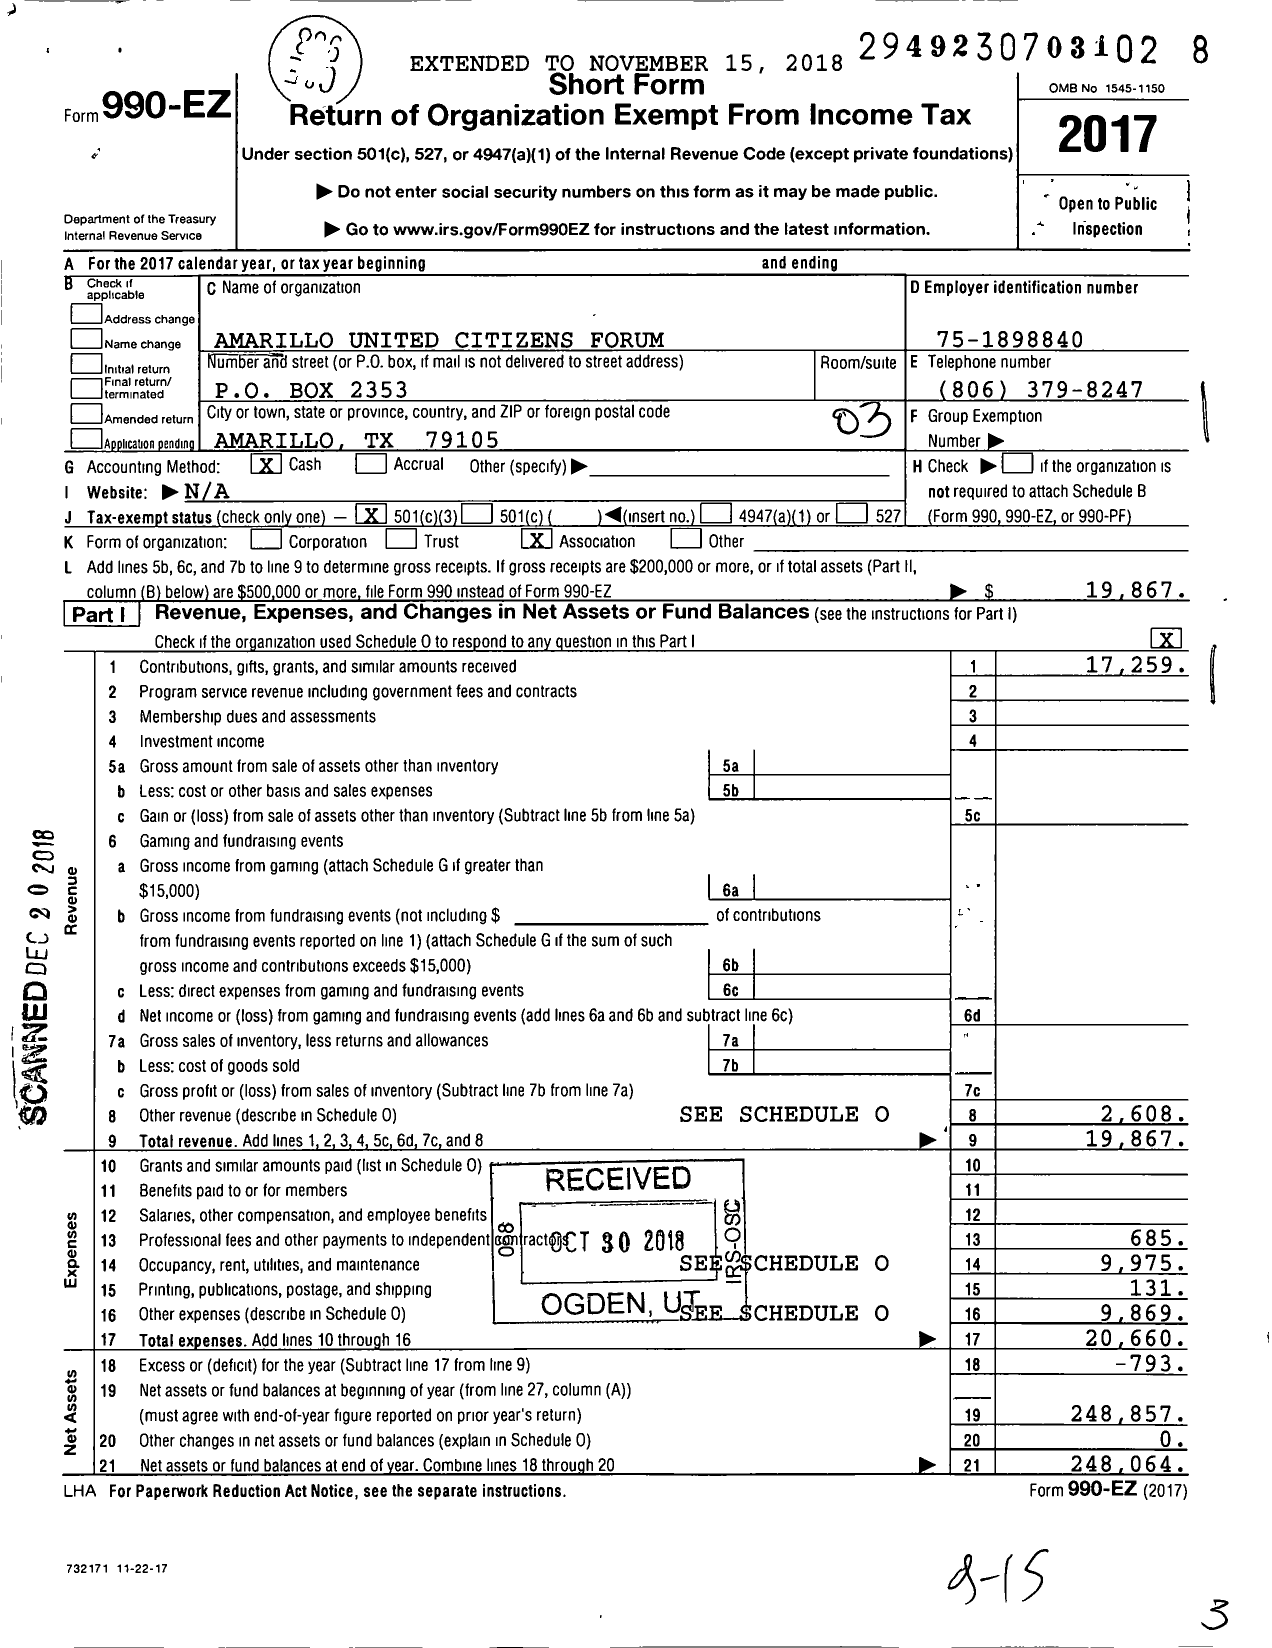 Image of first page of 2017 Form 990EZ for Amarillo United Citizens Forum